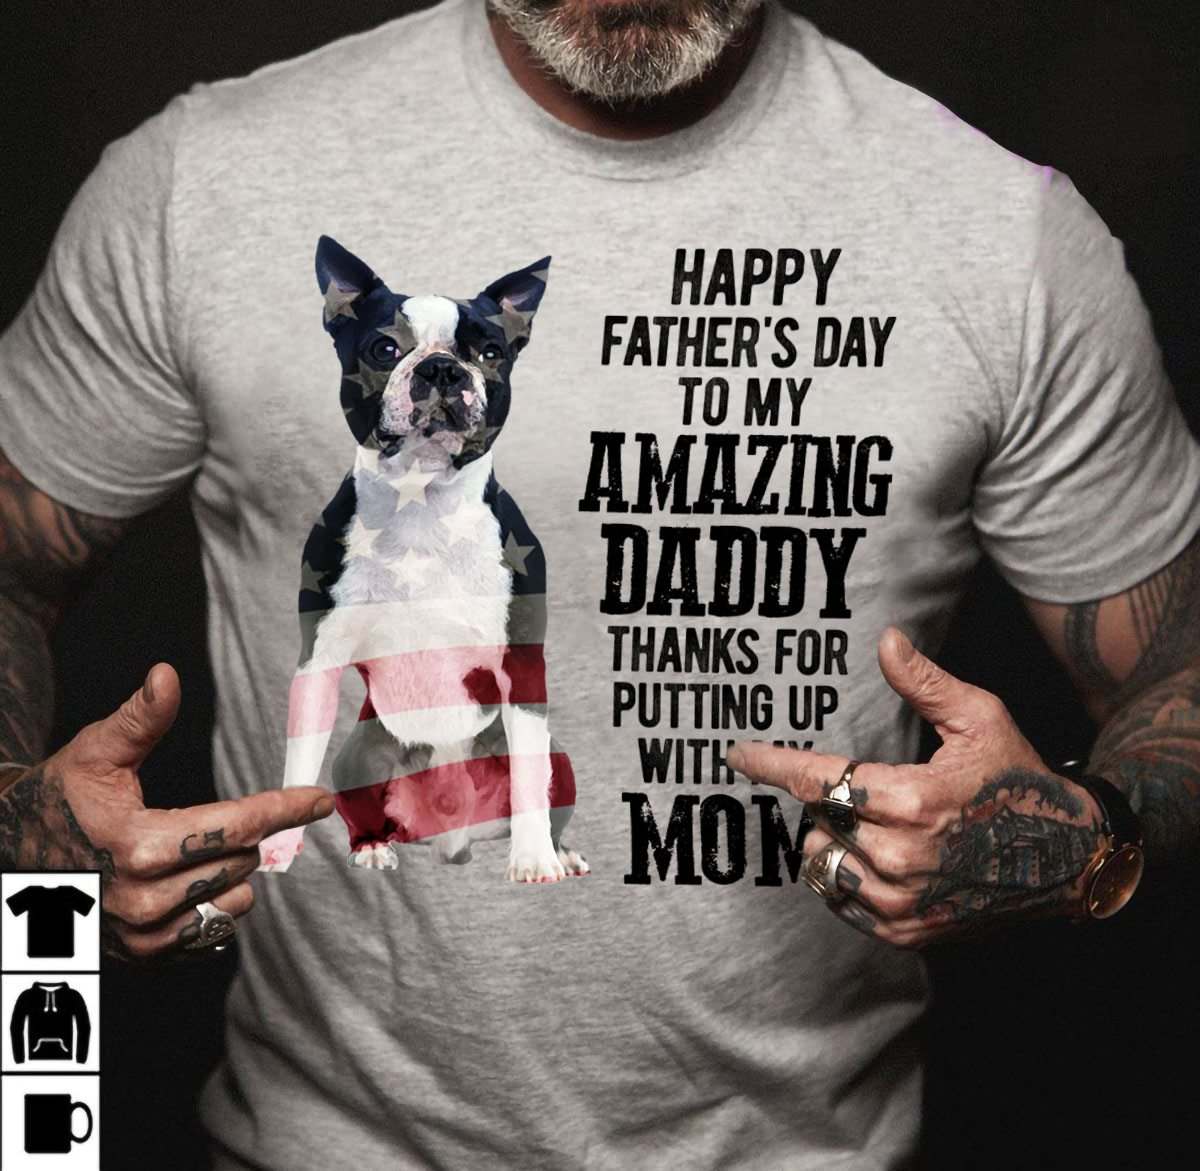 Boston Terrier - Happy father's day to my amazing daddy thanks for putting up with my mom